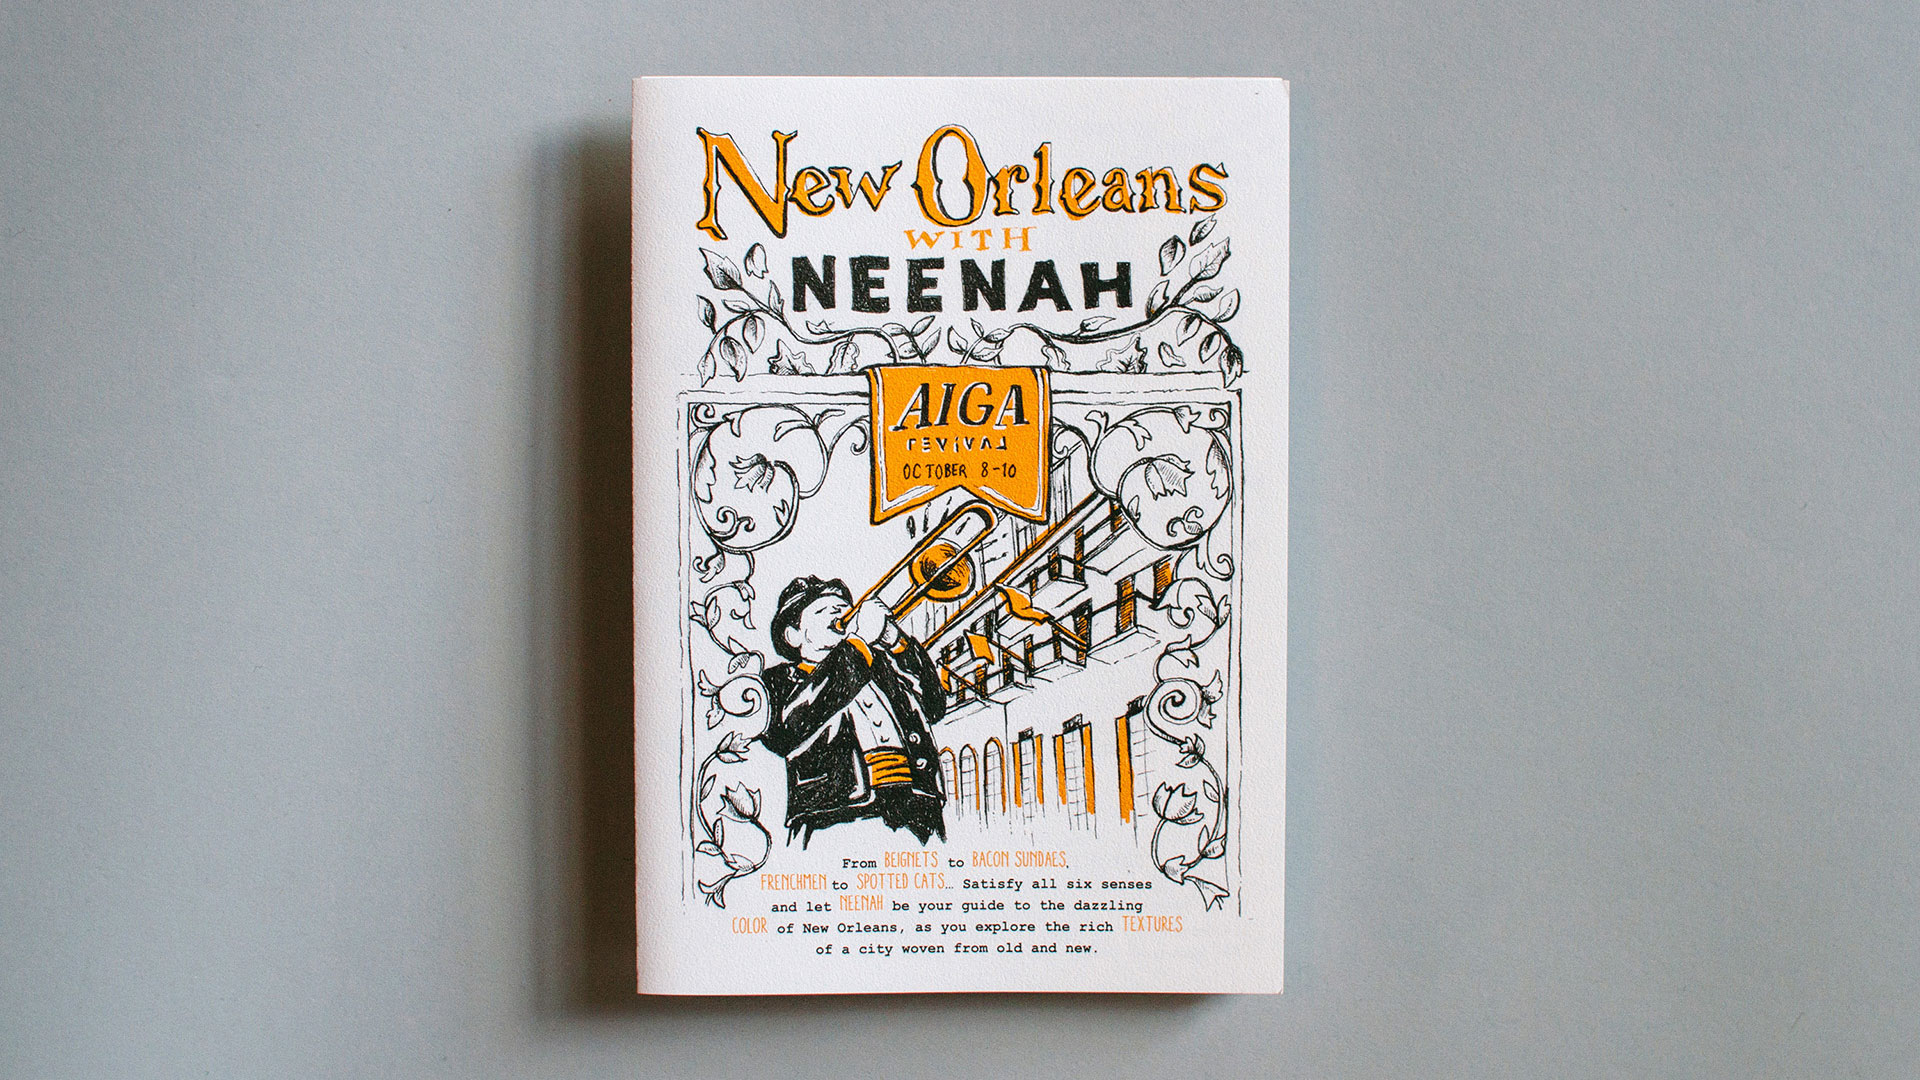 New Orleans Map with Neenah - PaperSpecs